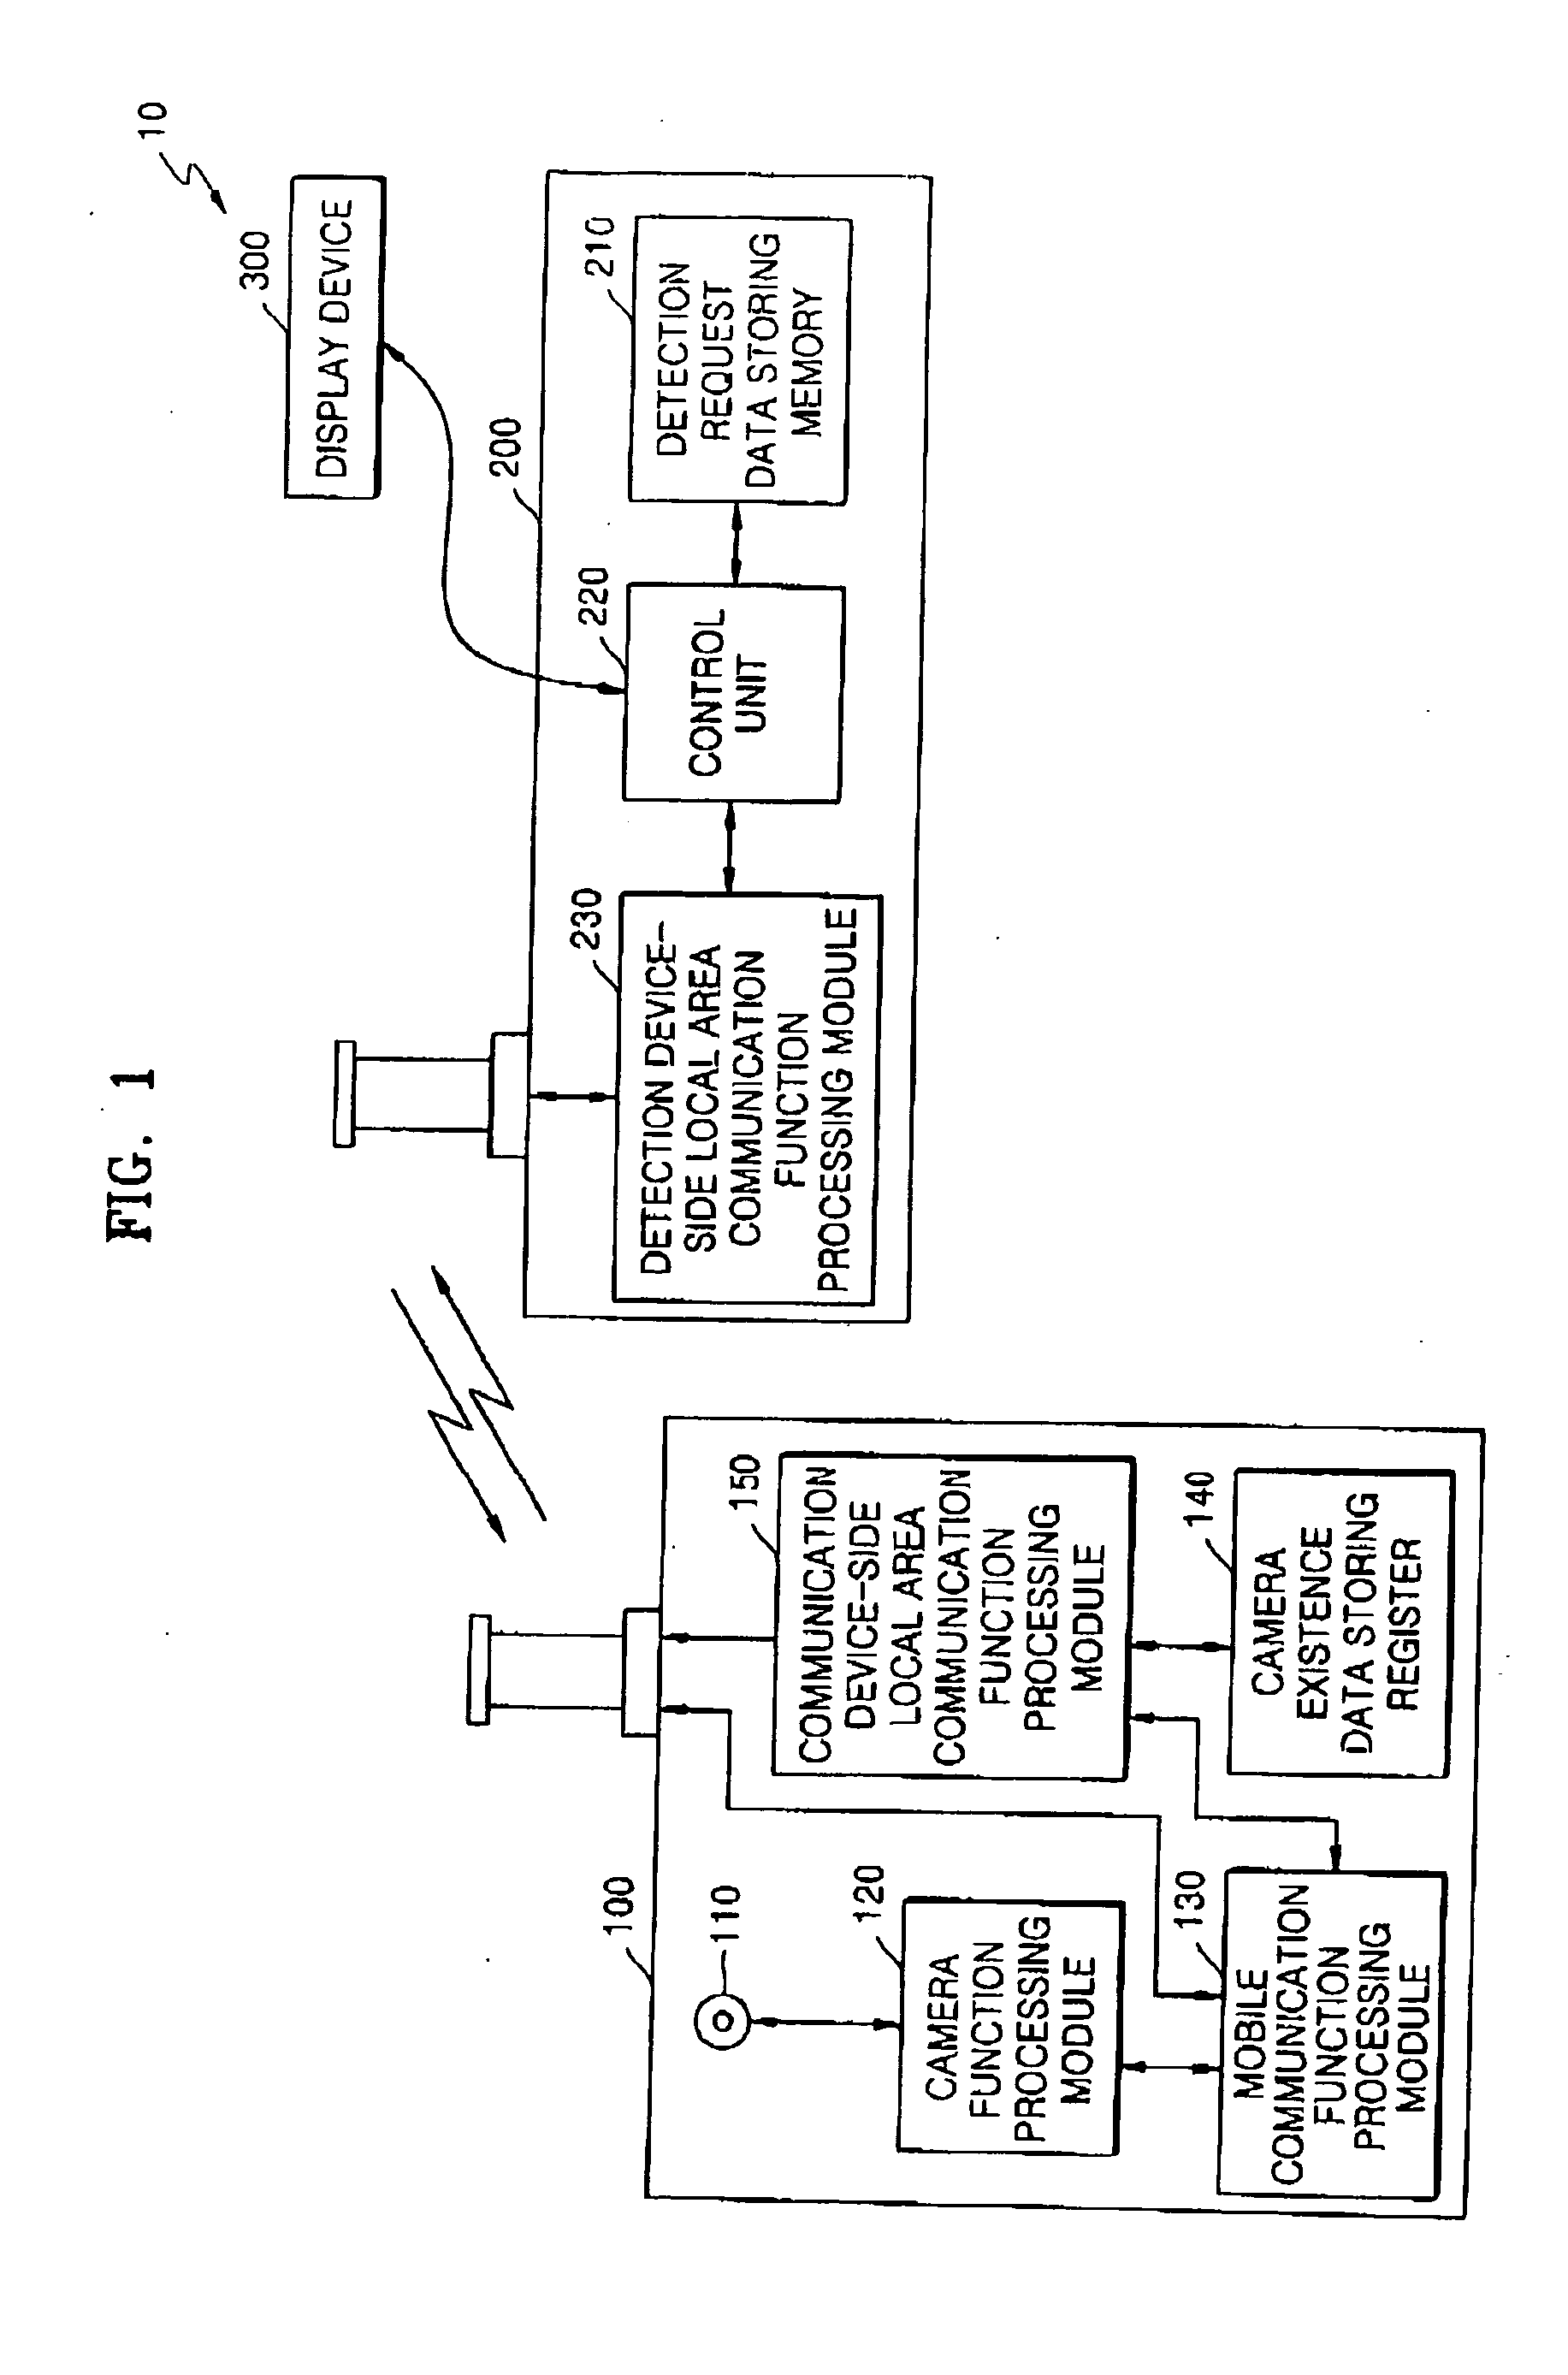 System and method of detecting communication device having built-in camera